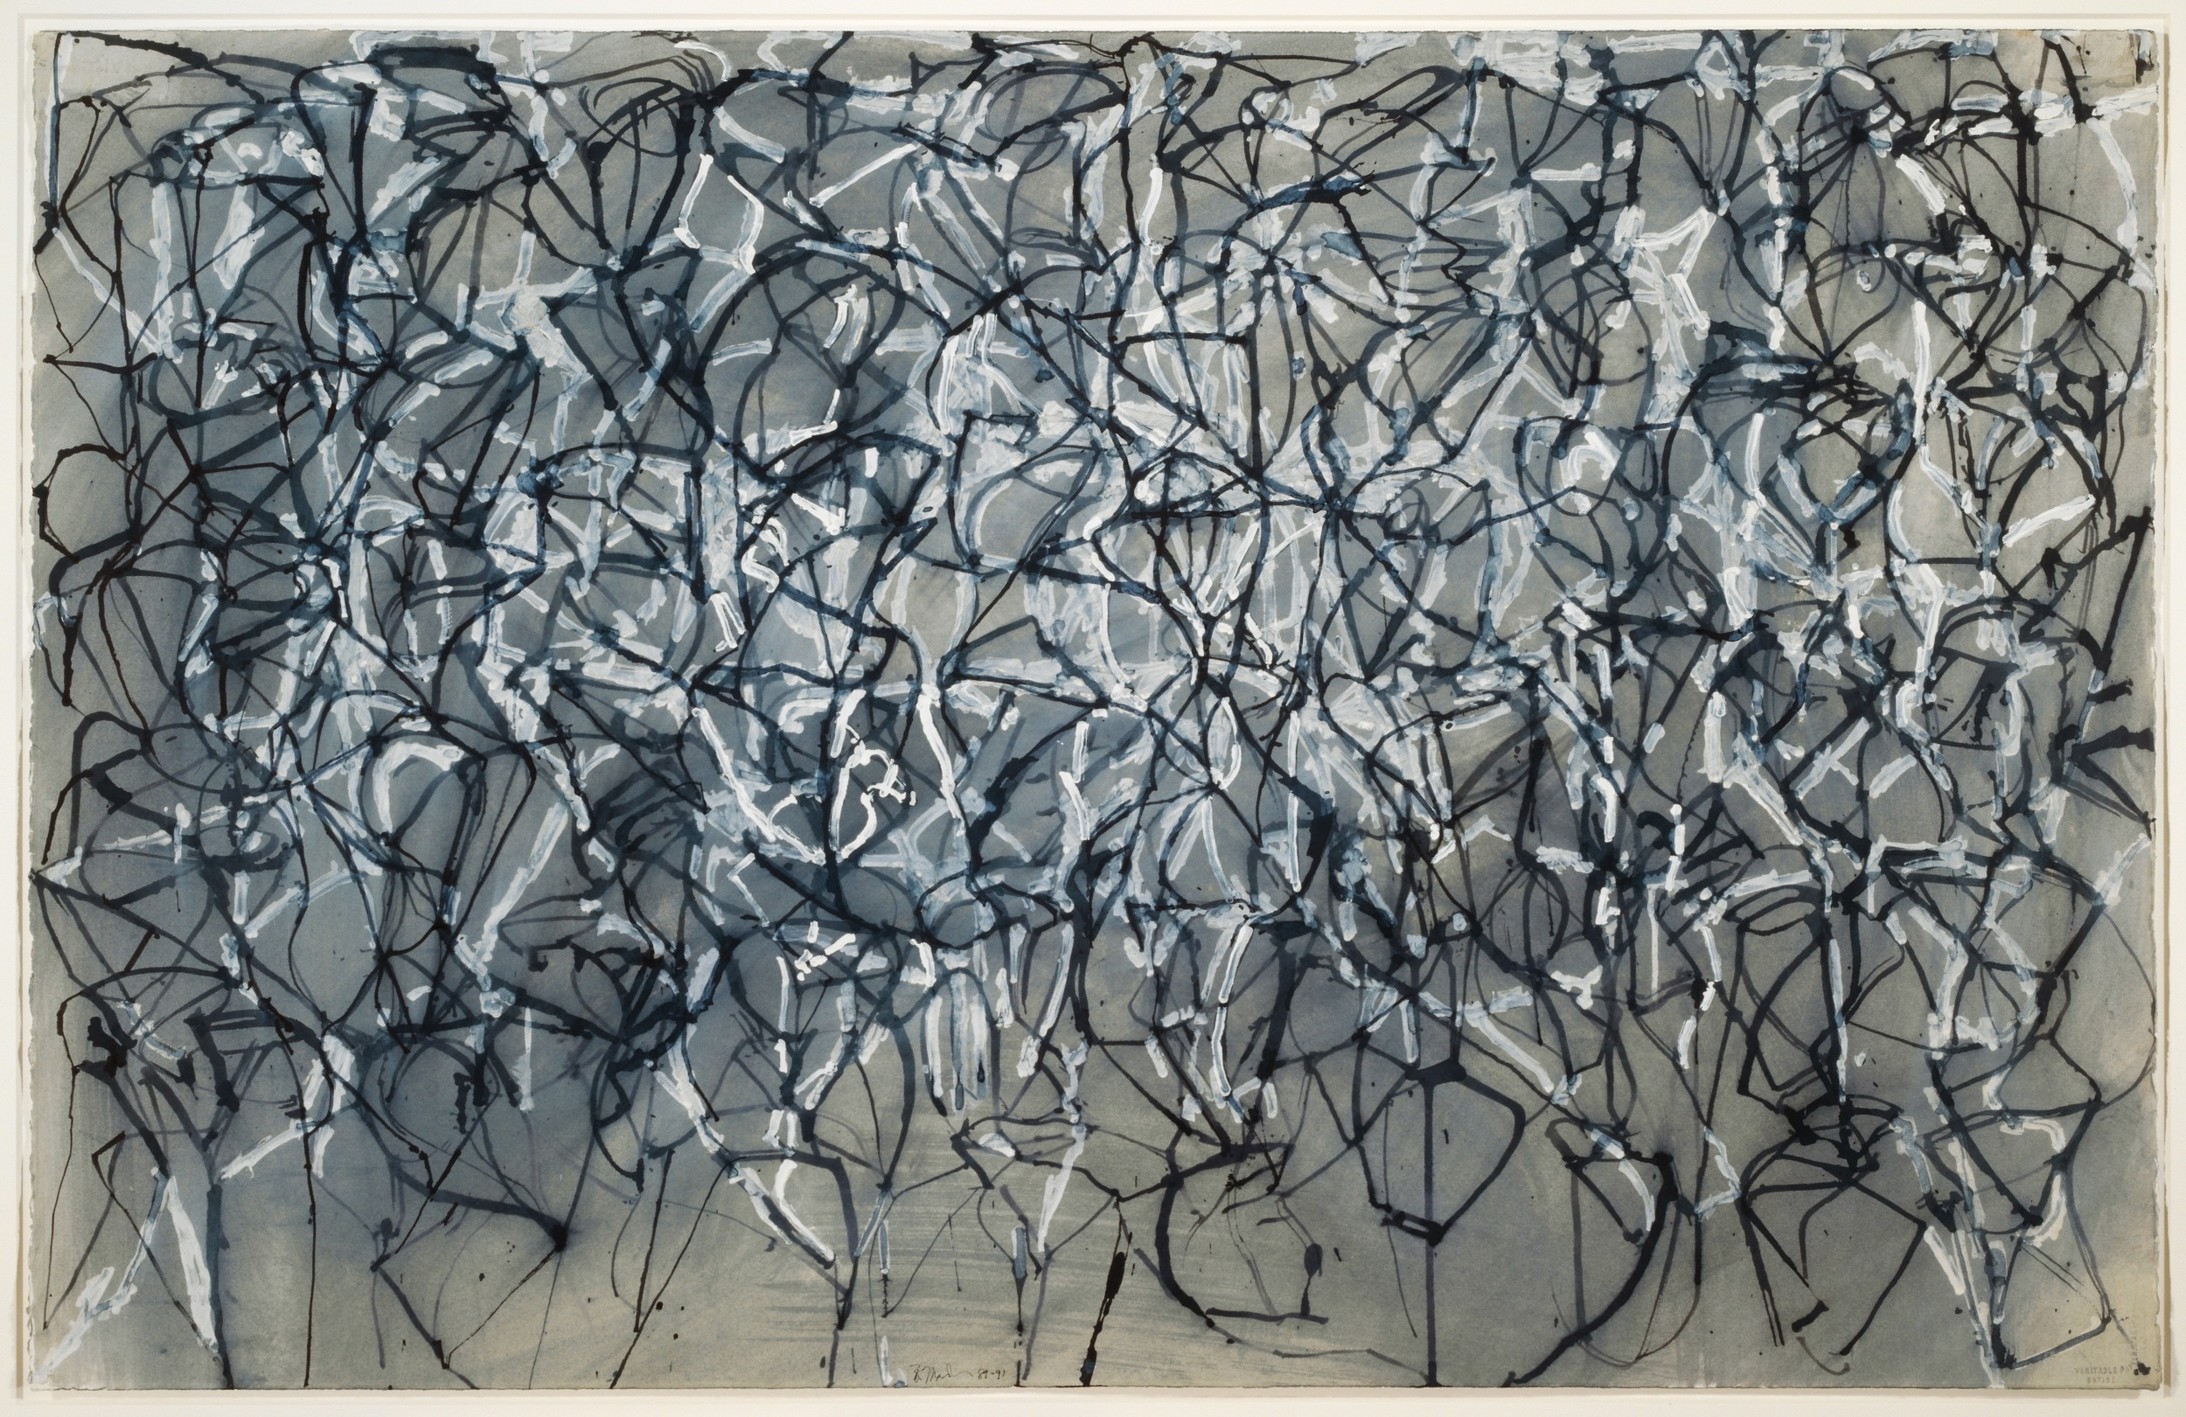 Brice Marden: Muses Drawing 2